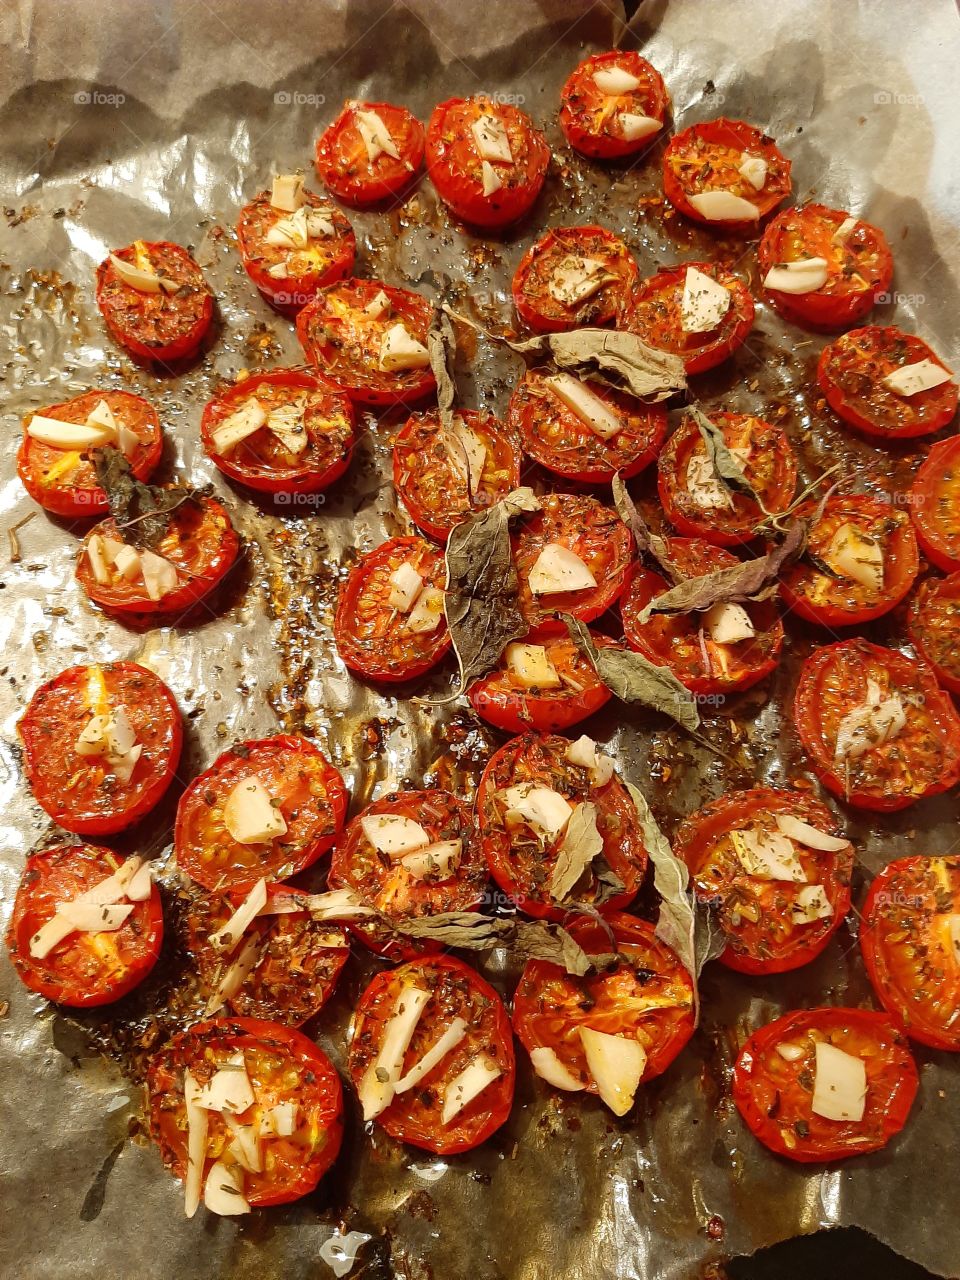 sun-dried tomatoes with herbs in parchment paper